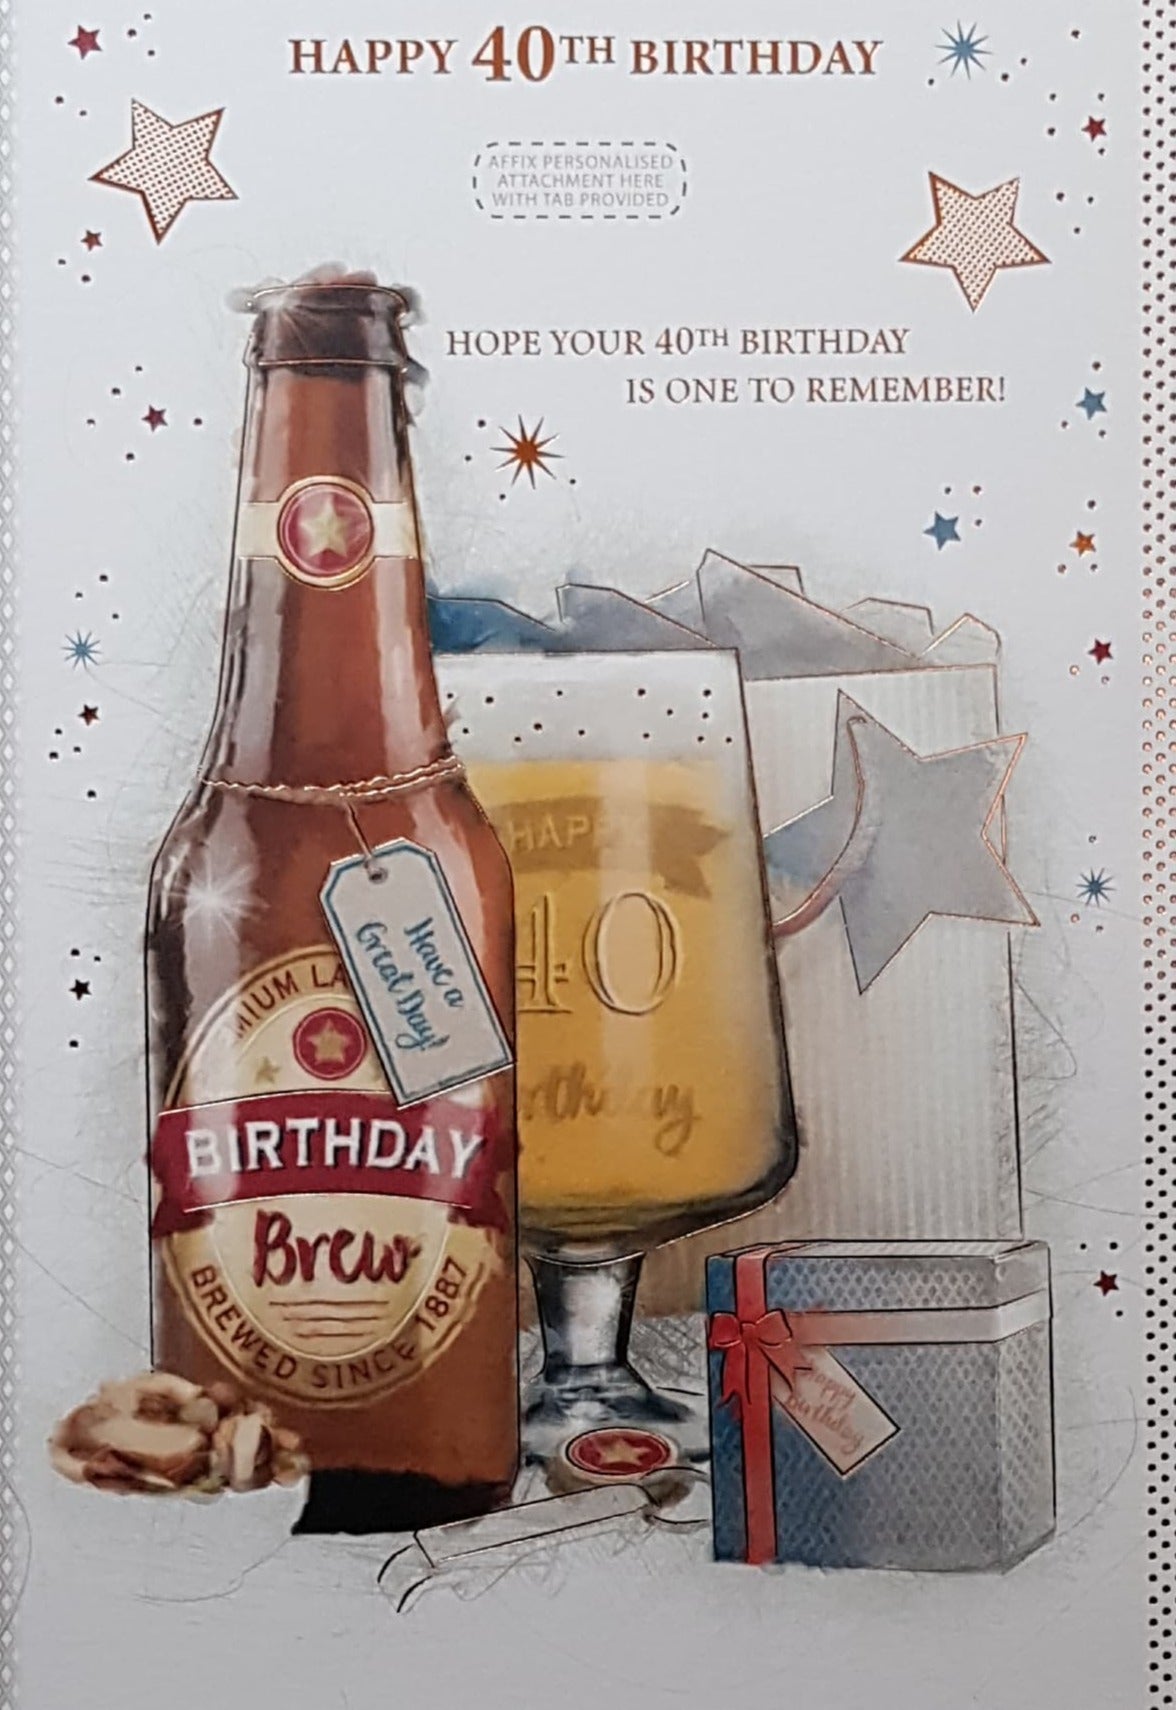 Personalised Card - Age 40 Birthday / A Beer Bottle & A Glass & A Blue Gift Box